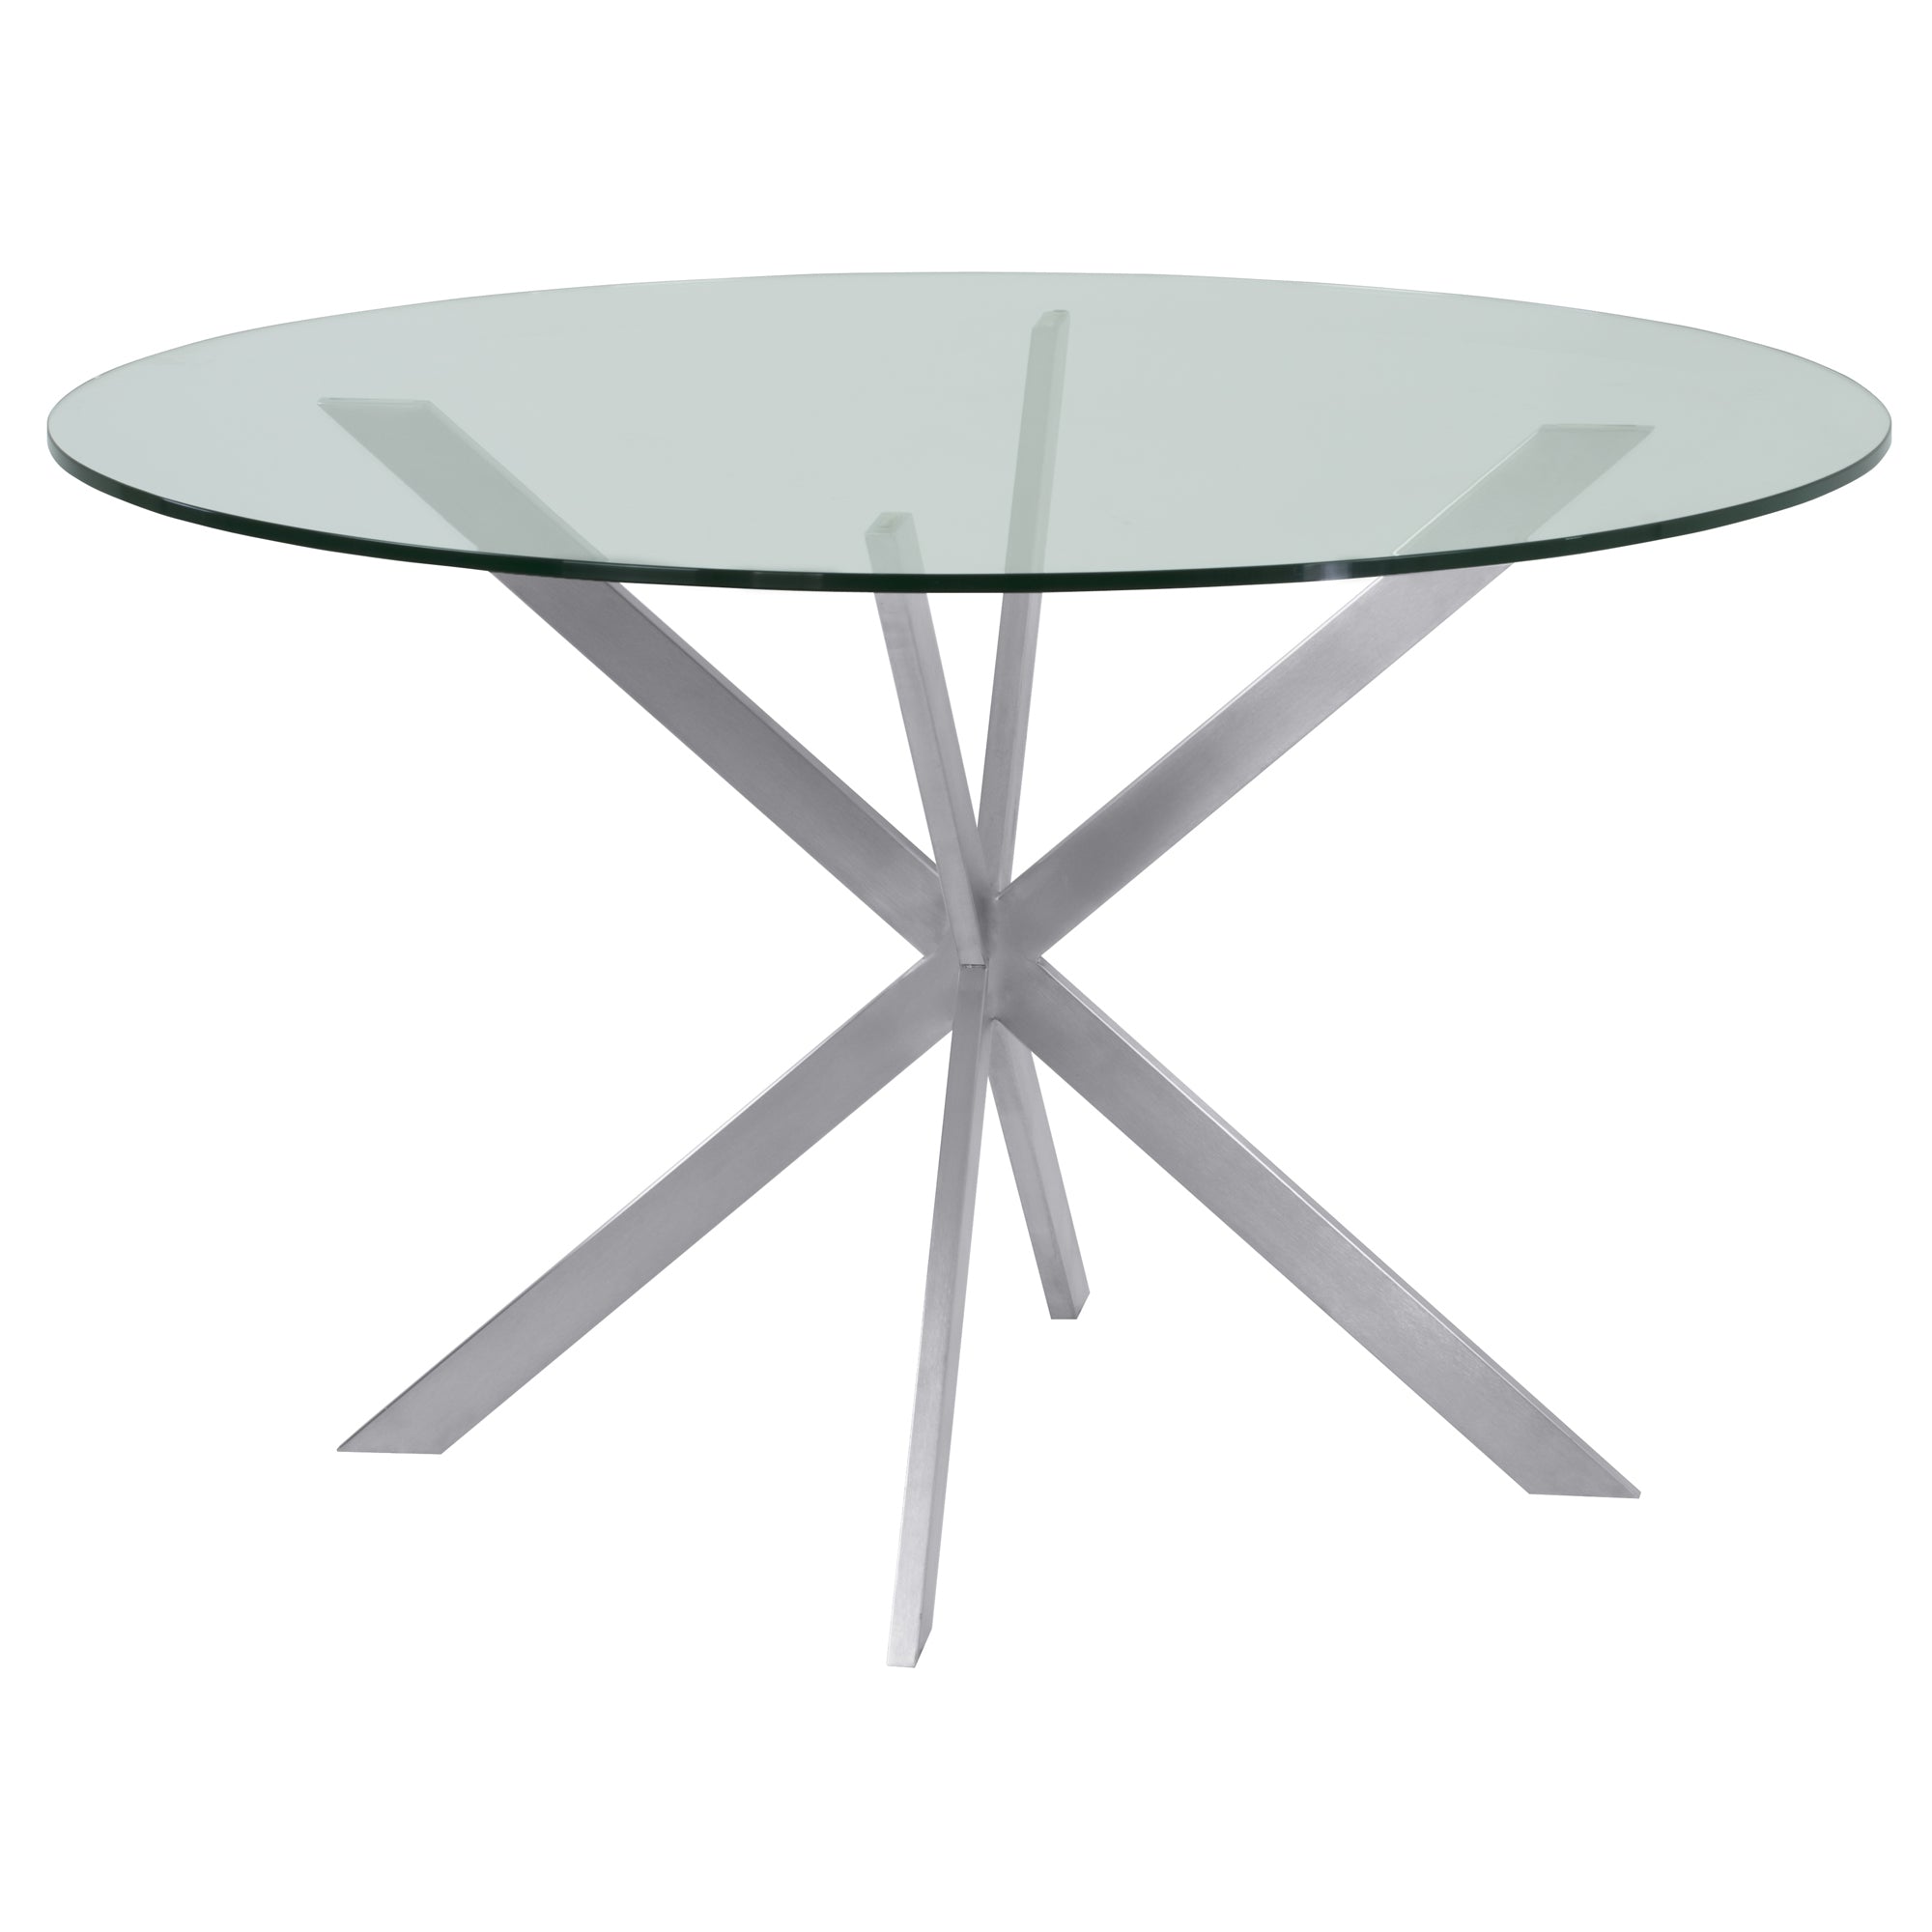 Armen Living Lcmyditoclear Mystere Round Dining Table In Brushed Stainless Steel With Clear Tempered Glass Top